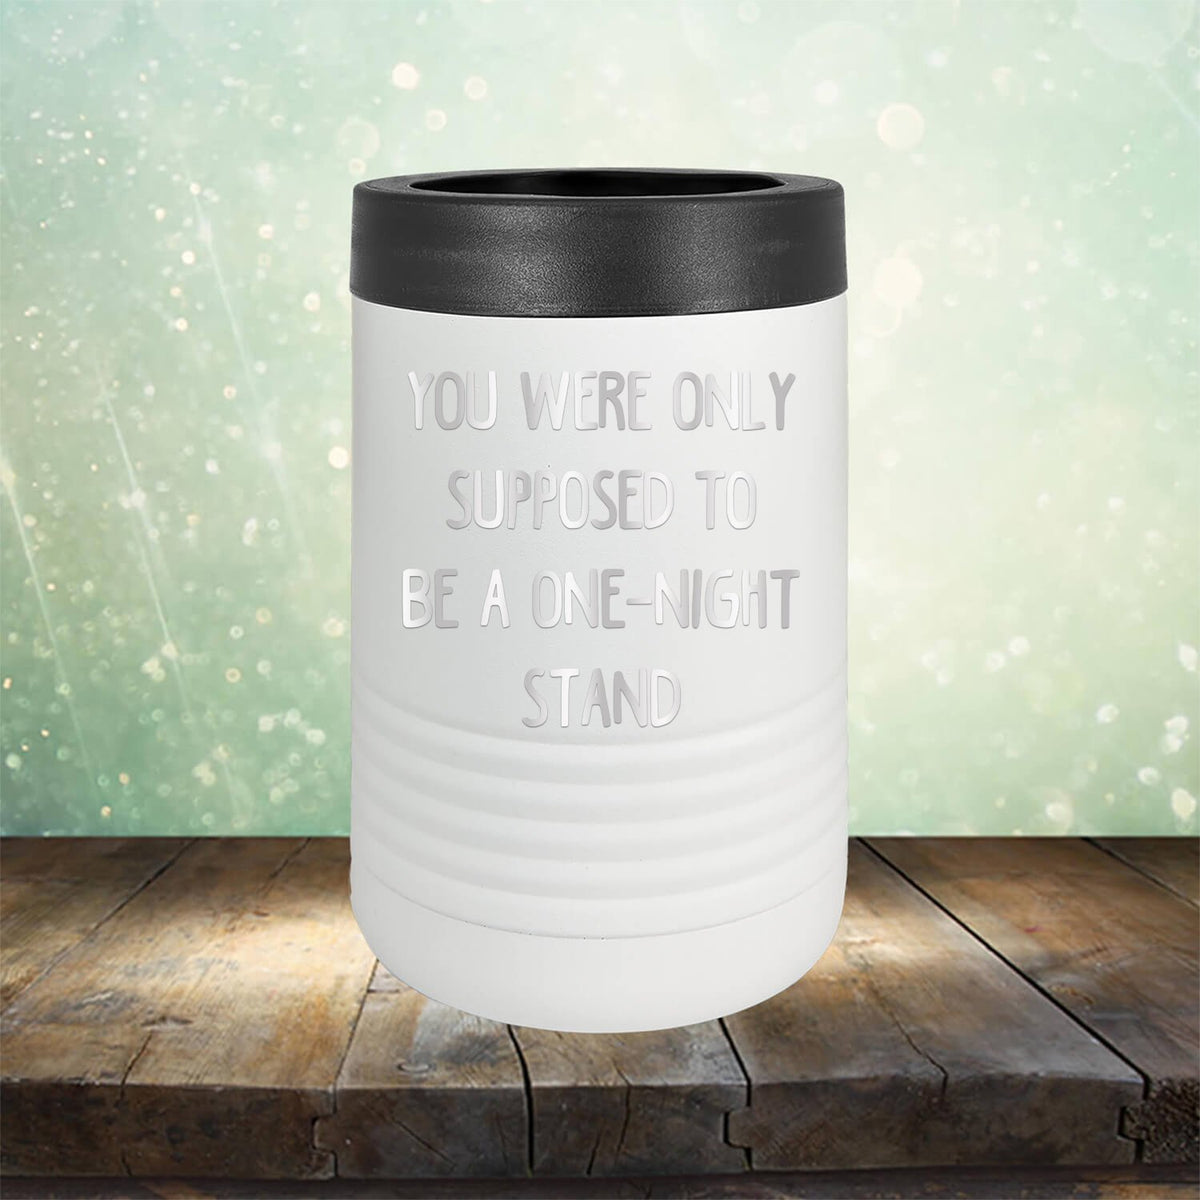 You Were Only Supposed To Be A One-Night Stand - Laser Etched Tumbler Mug